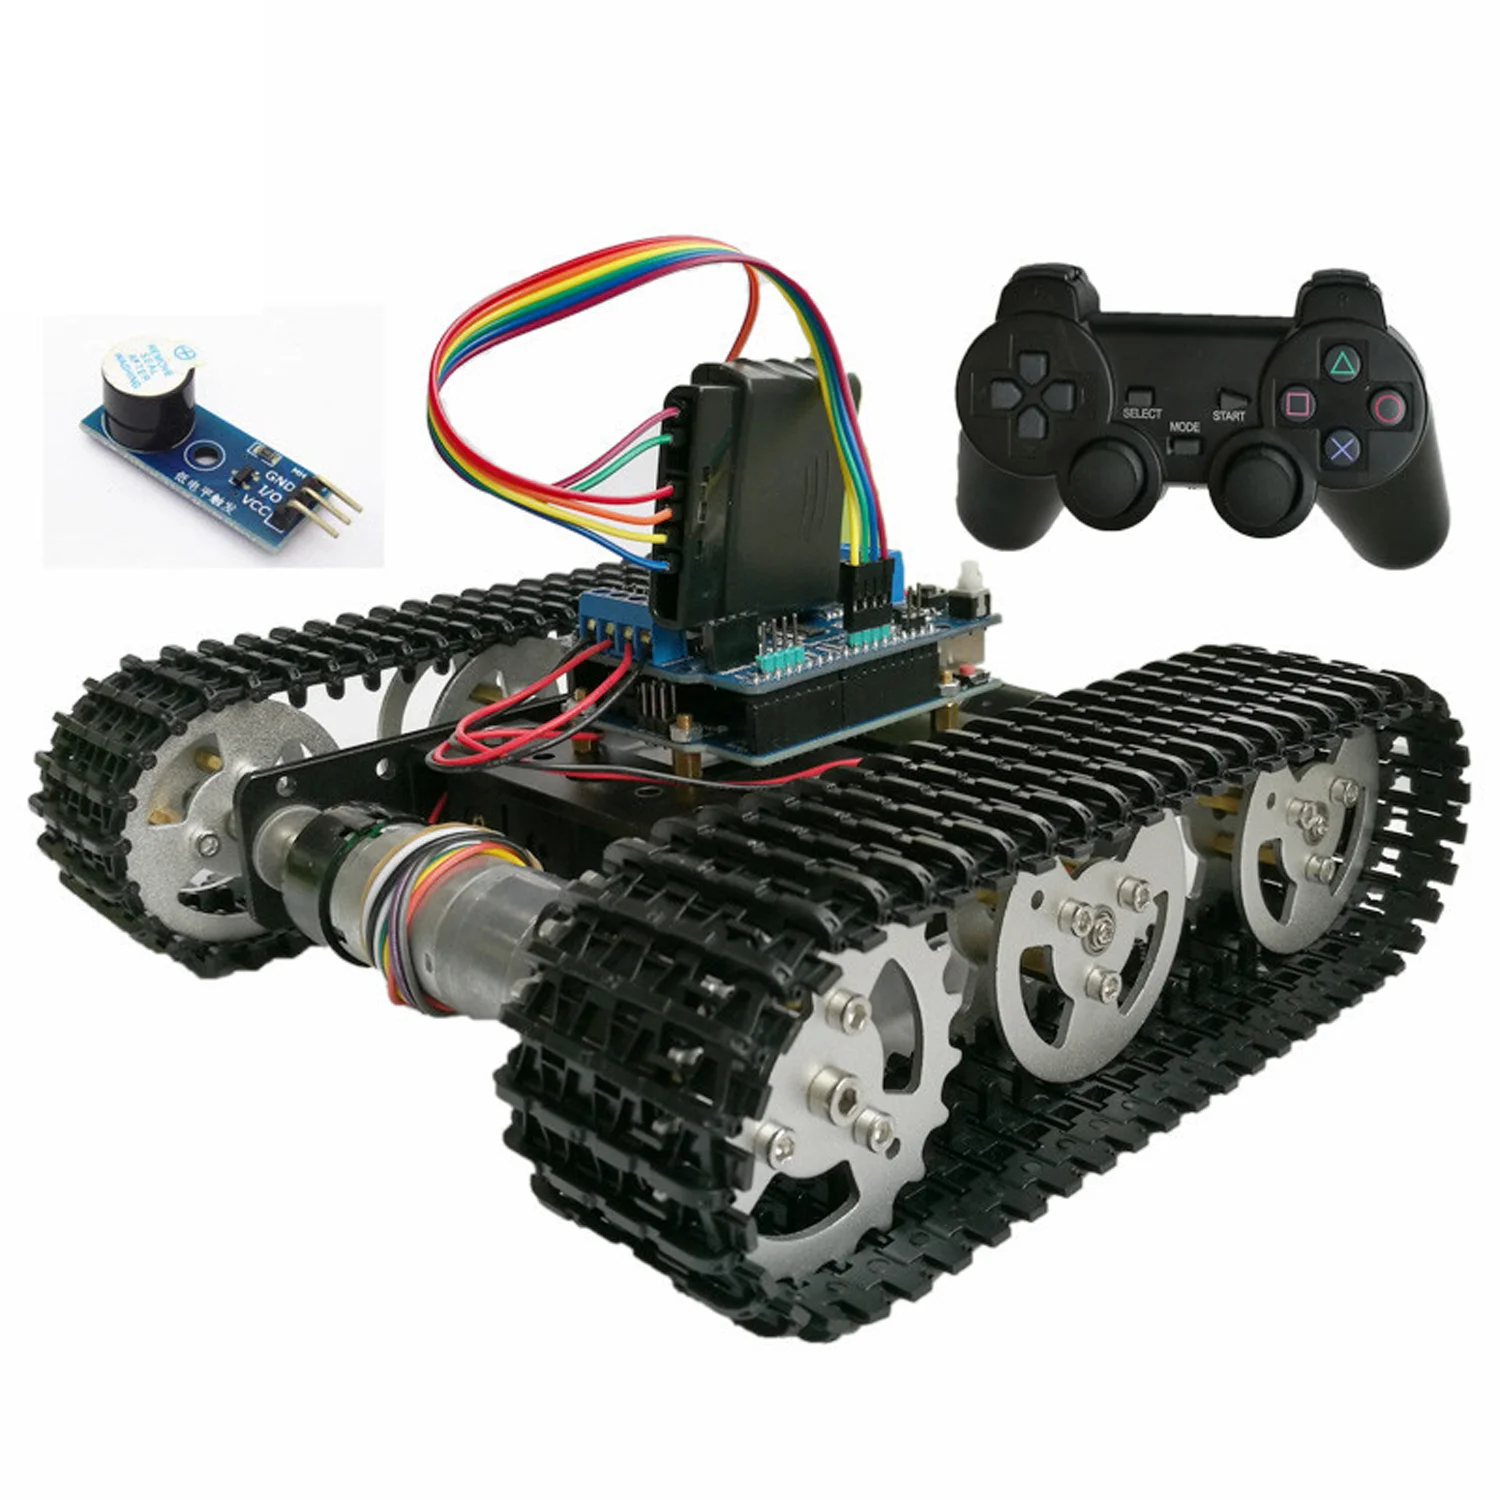 Wireless Control Smart RC Robot Kit by handle joystick Tank Car Chassis with Control Kit for  Motor Shield DIY game play station enlarge